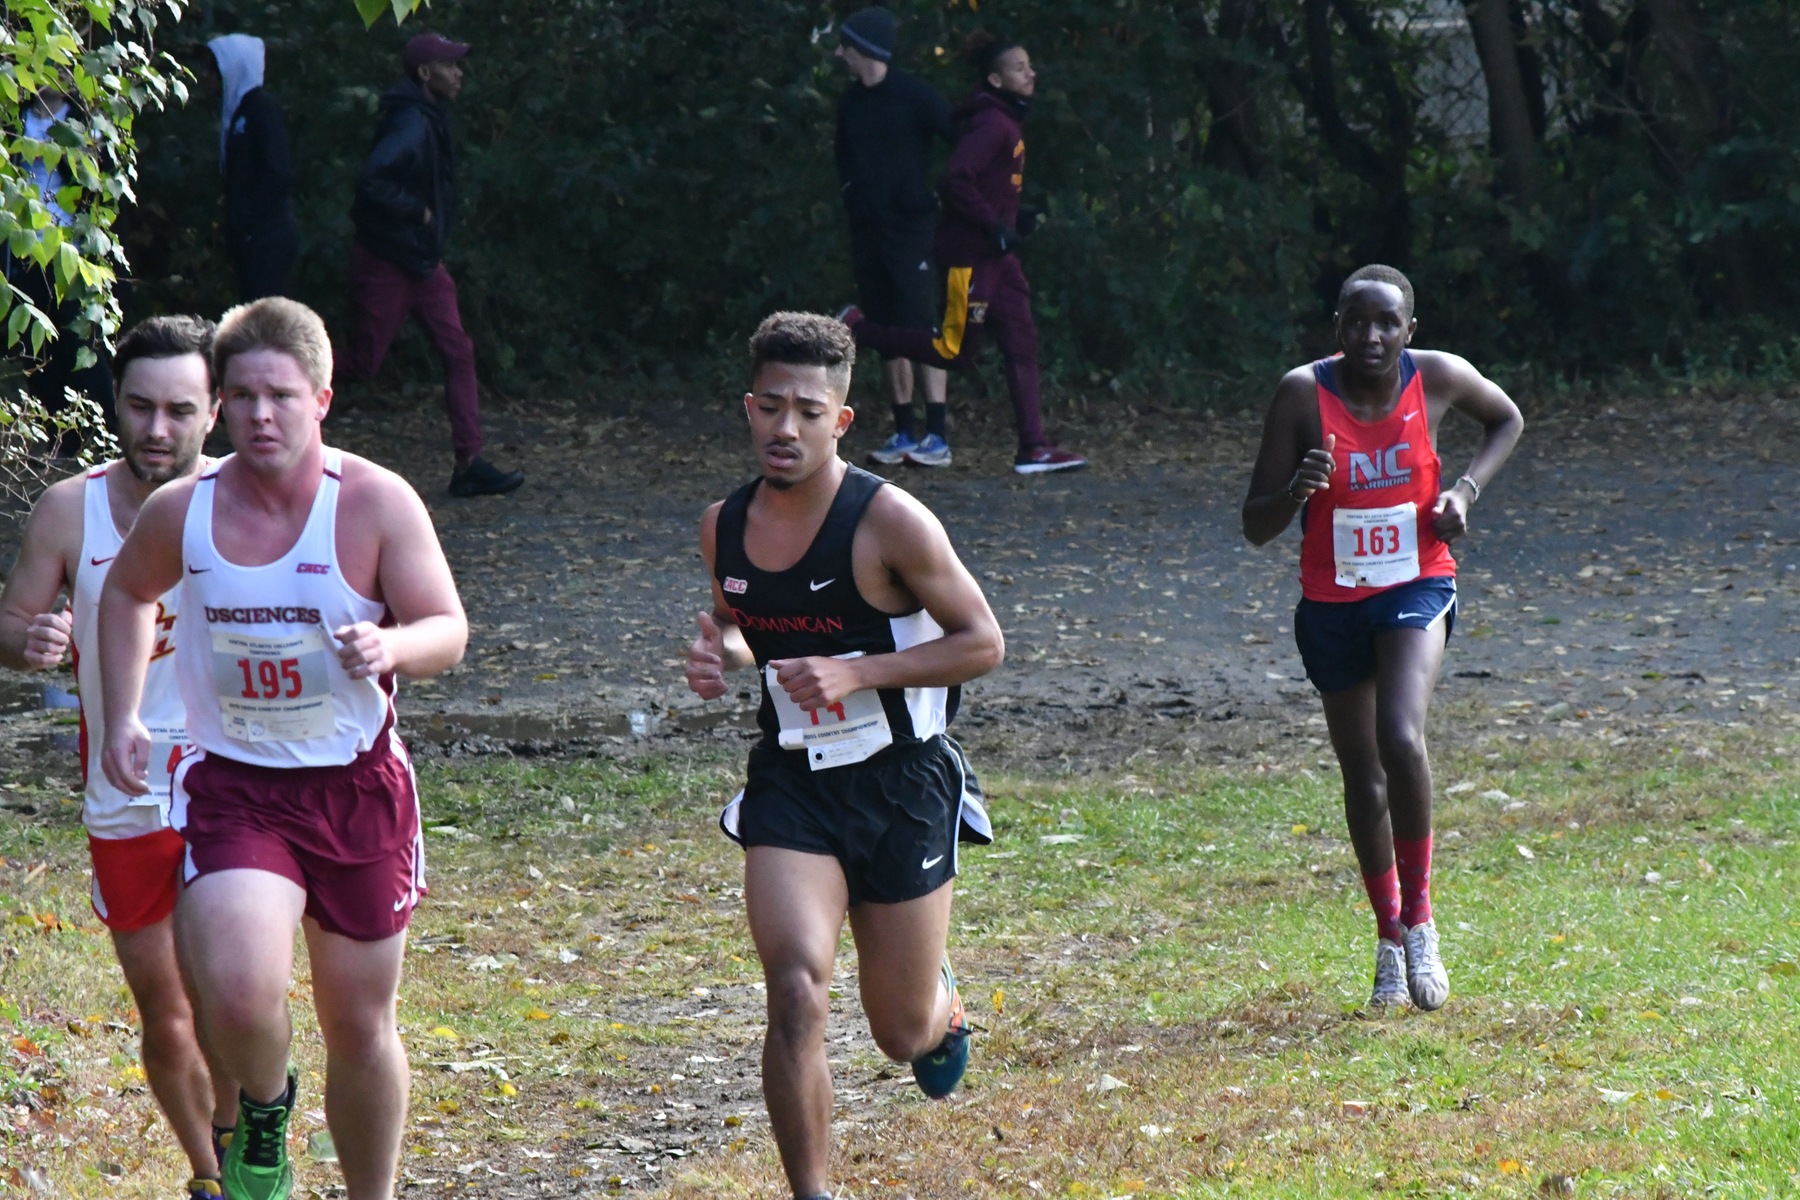 DOMINICAN CHARGERS TAKE FIFTH PLACE AT YORK XC INVITATIONAL